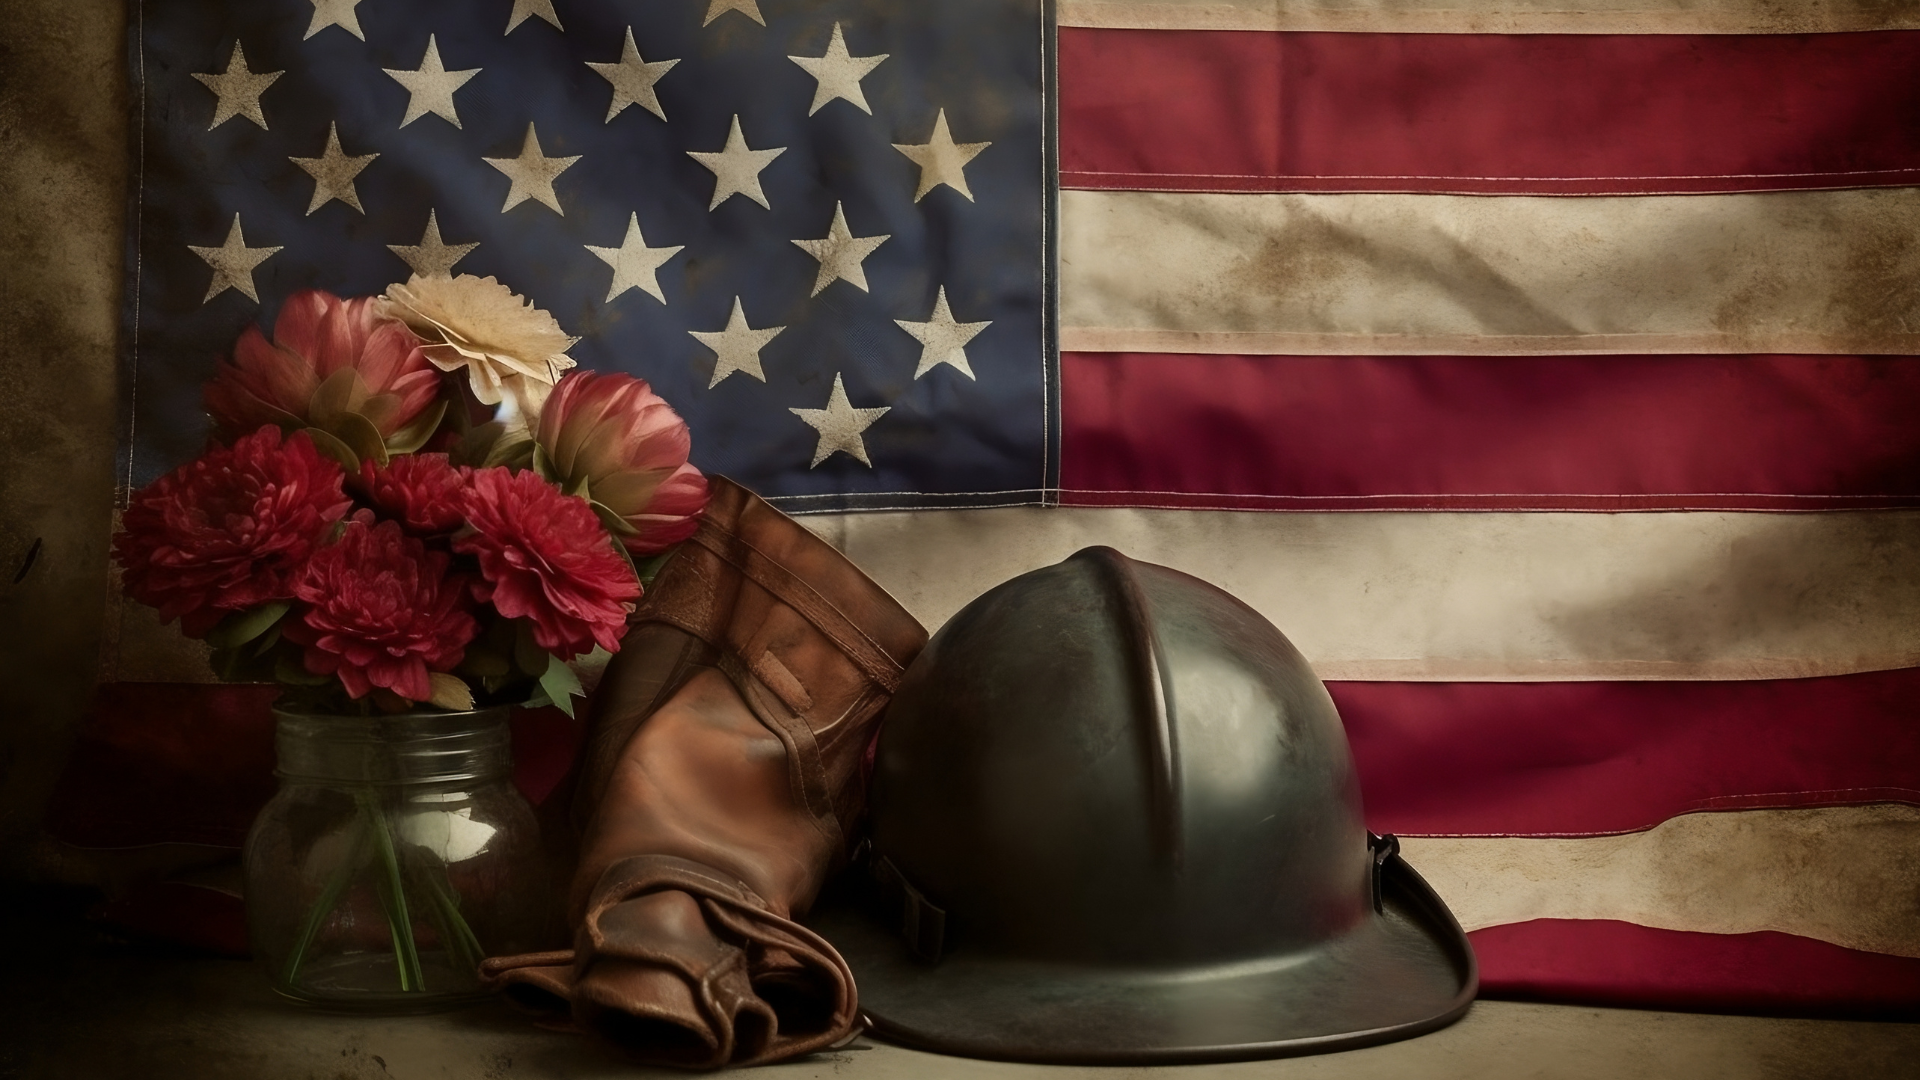 Old American flag with flowers, army helmet and boots